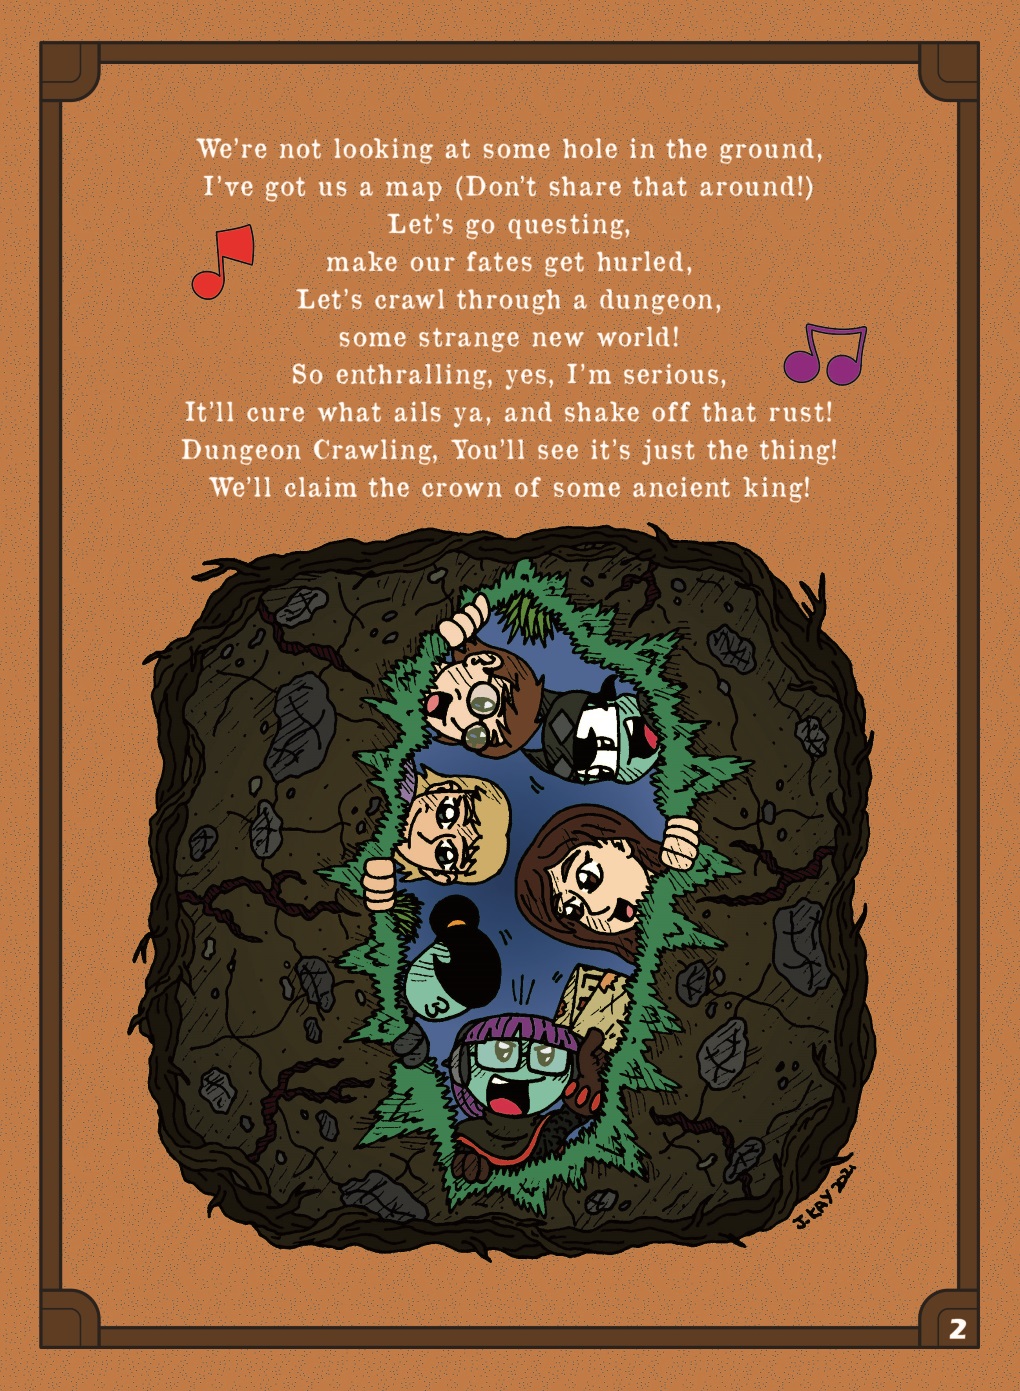 The Strangest Coven by Cartoonist_at_Large page 2 out of 8